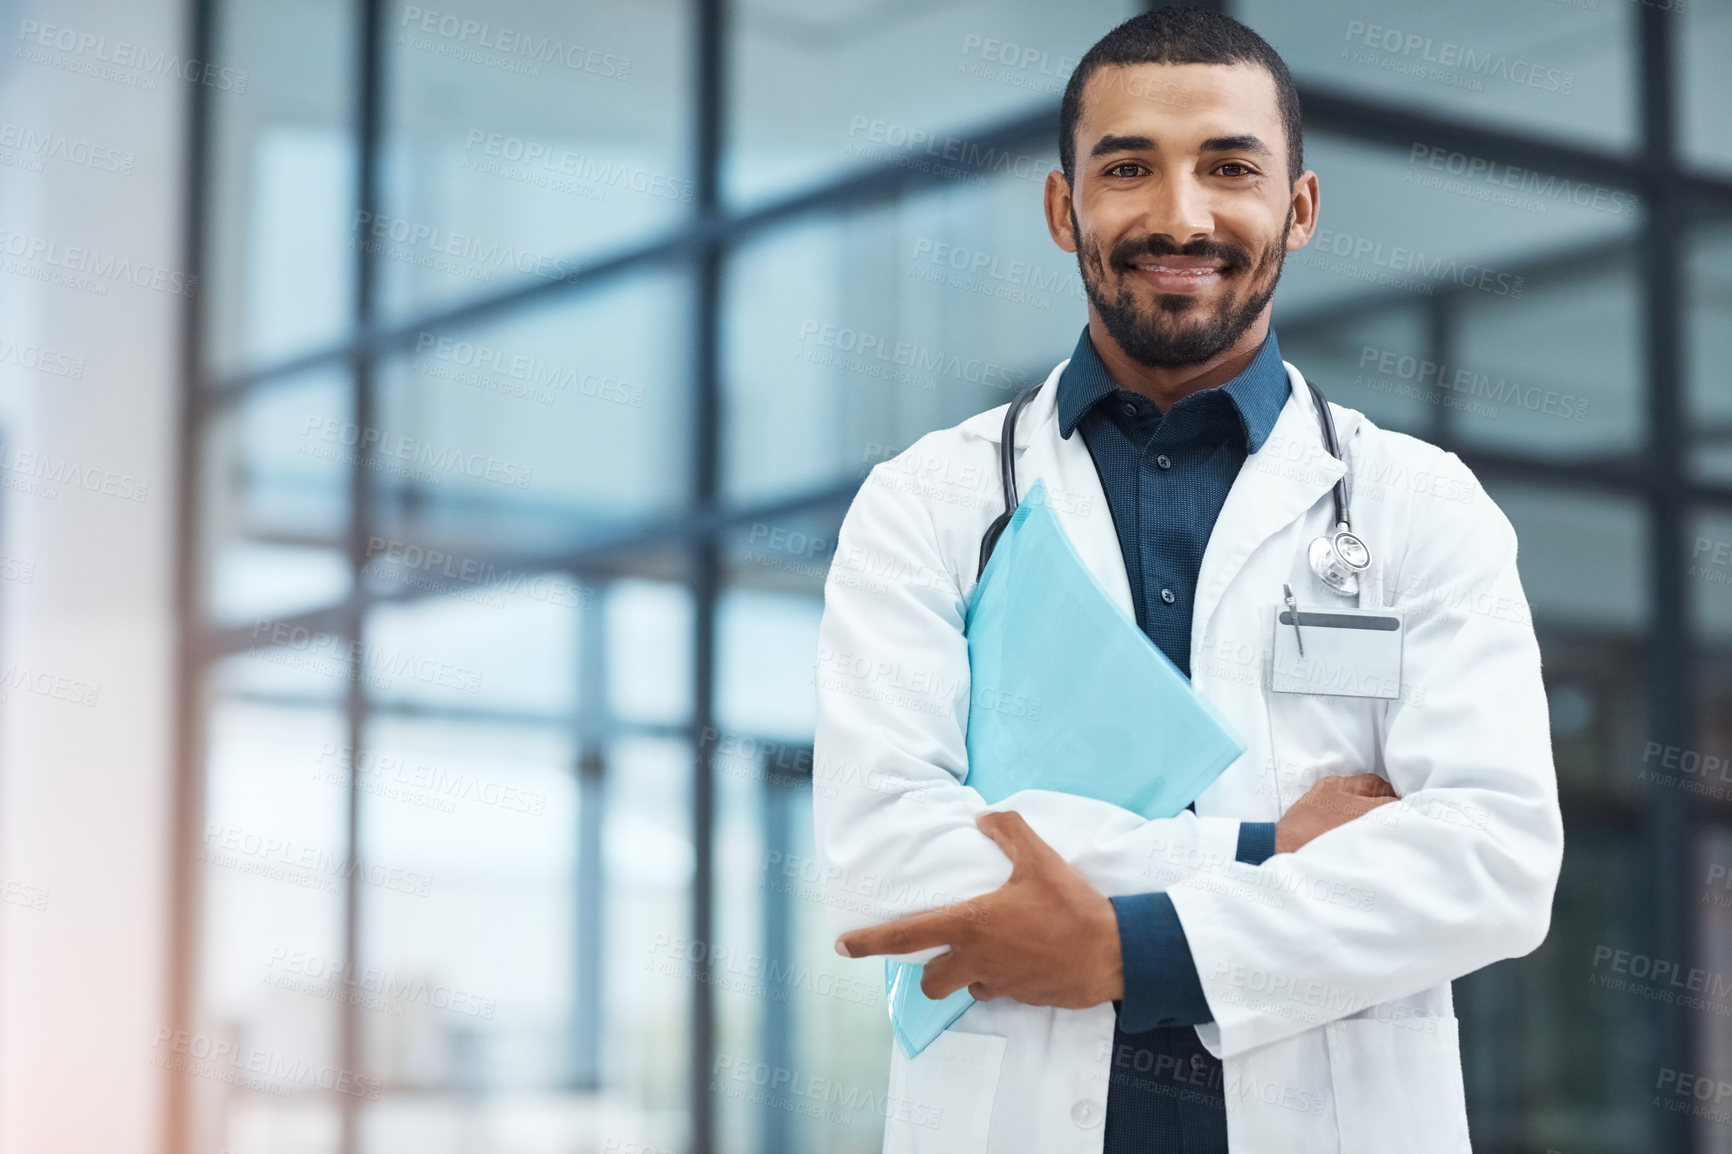 Buy stock photo Portrait of a young doctor holding a file in a modern hospital